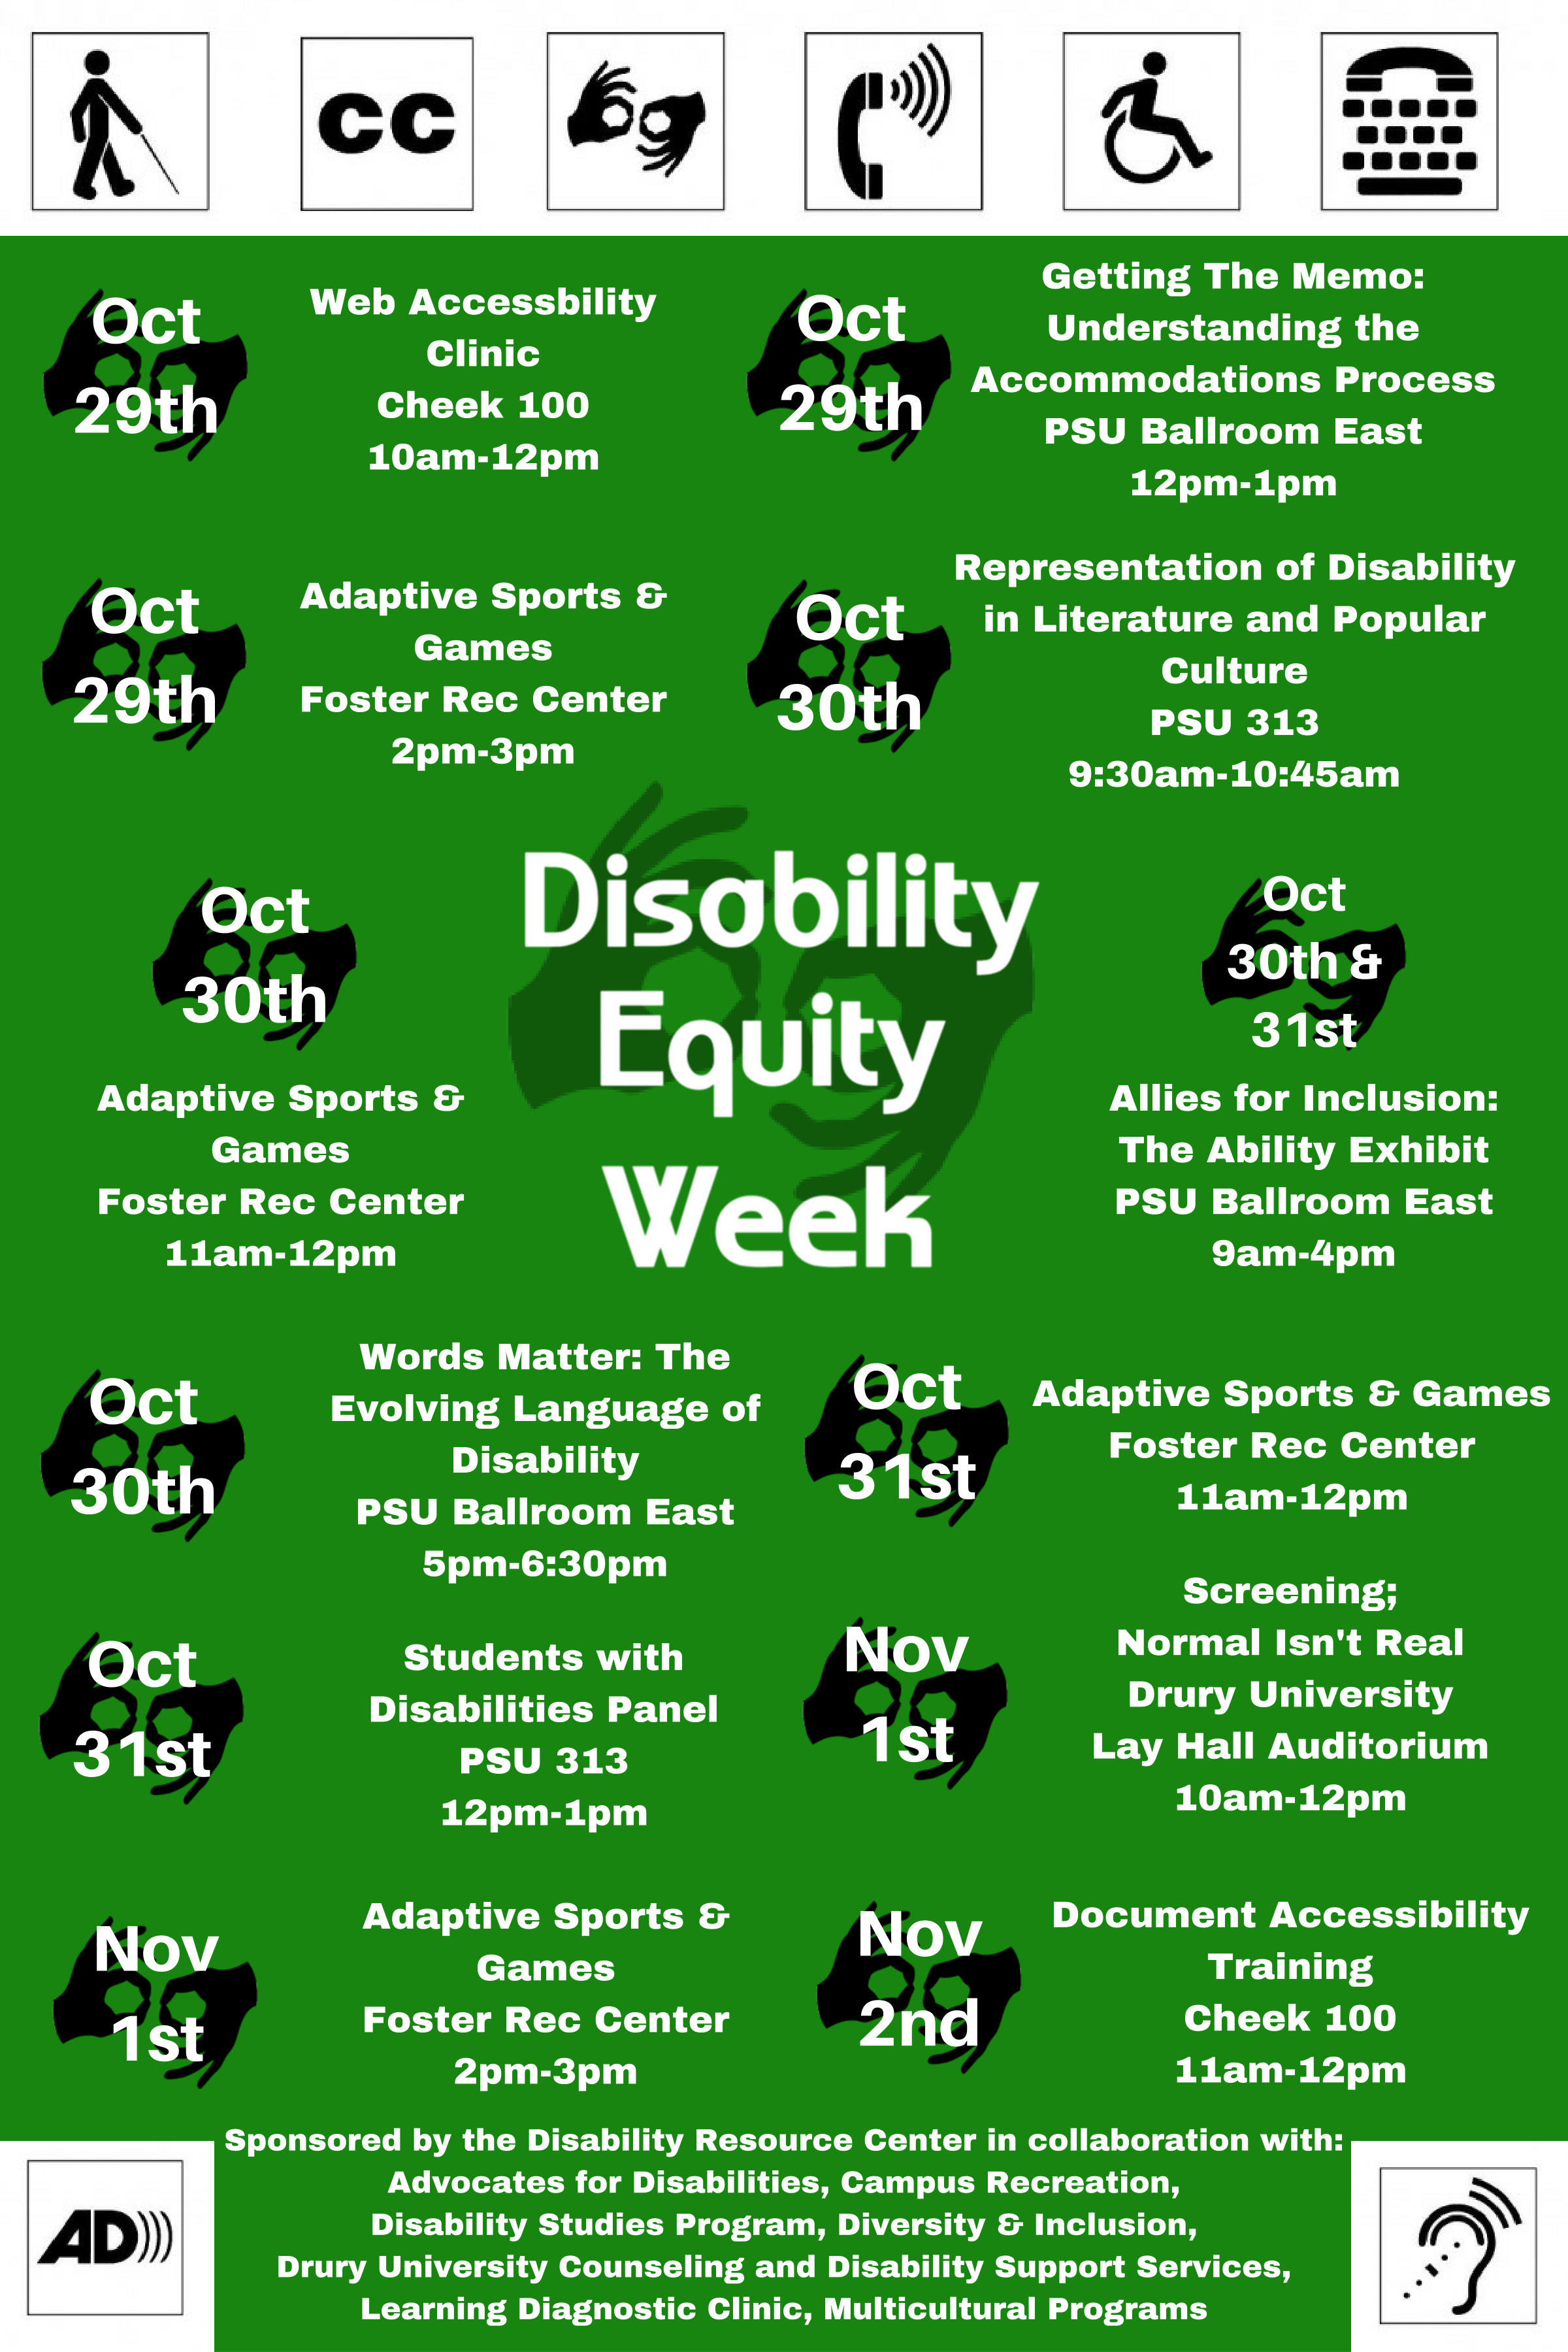 Disability Equity Week 2018